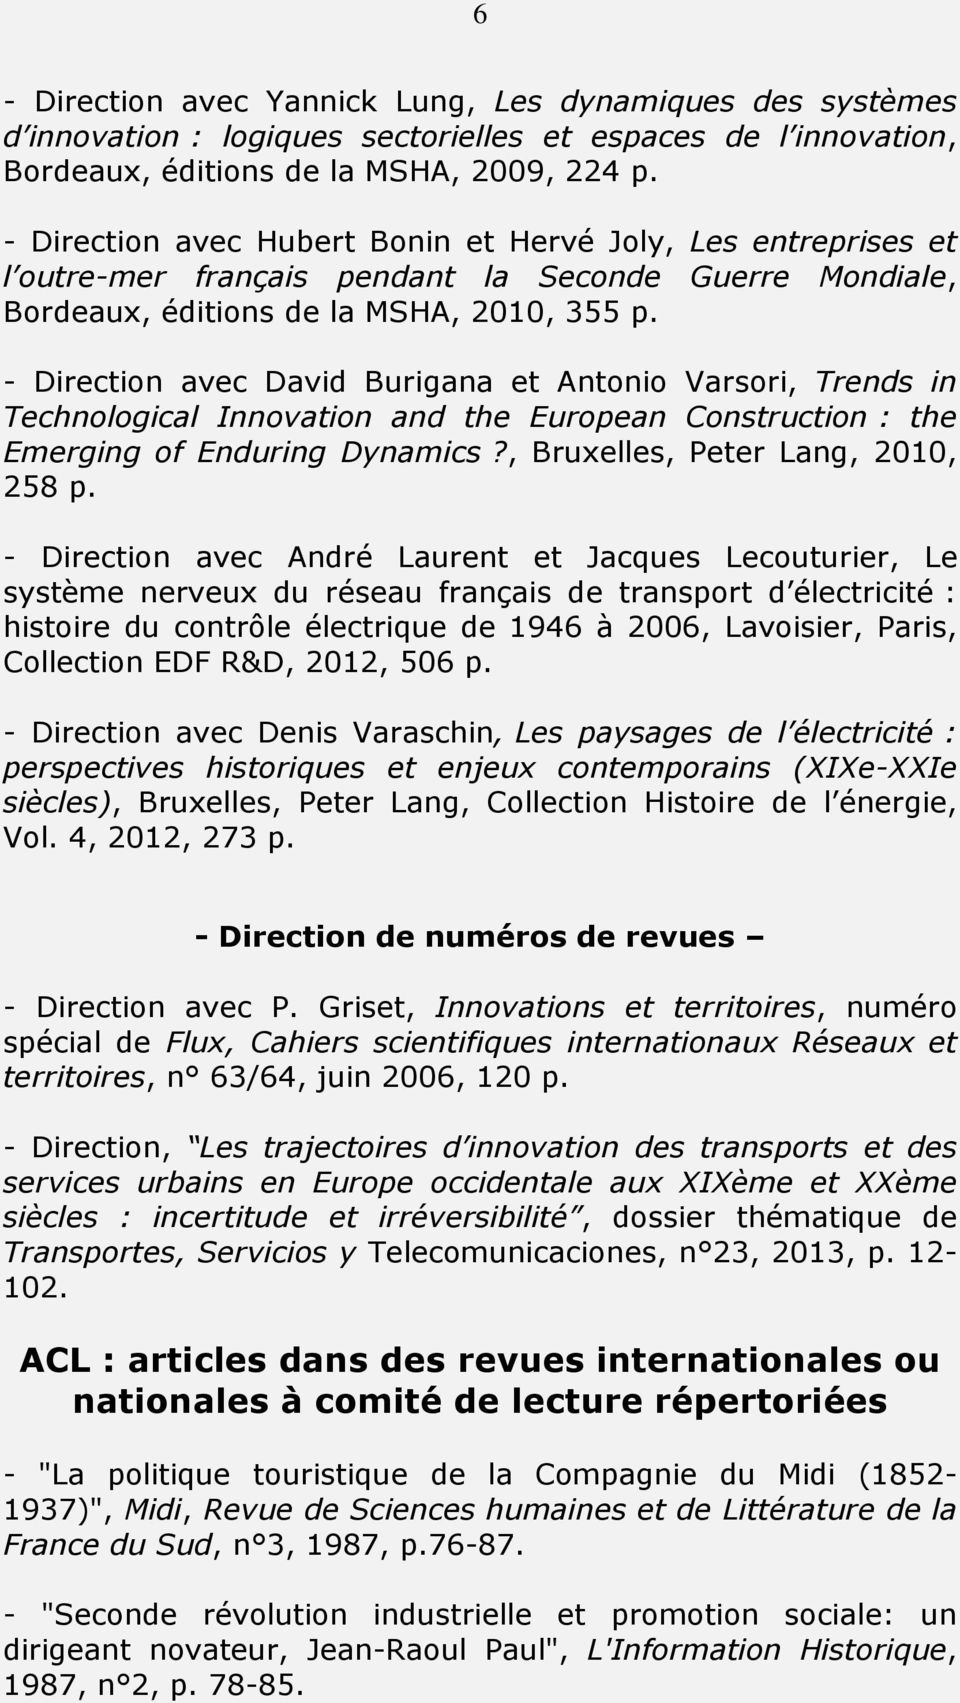 - Direction avec David Burigana et Antonio Varsori, Trends in Technological Innovation and the European Construction : the Emerging of Enduring Dynamics?, Bruxelles, Peter Lang, 2010, 258 p.